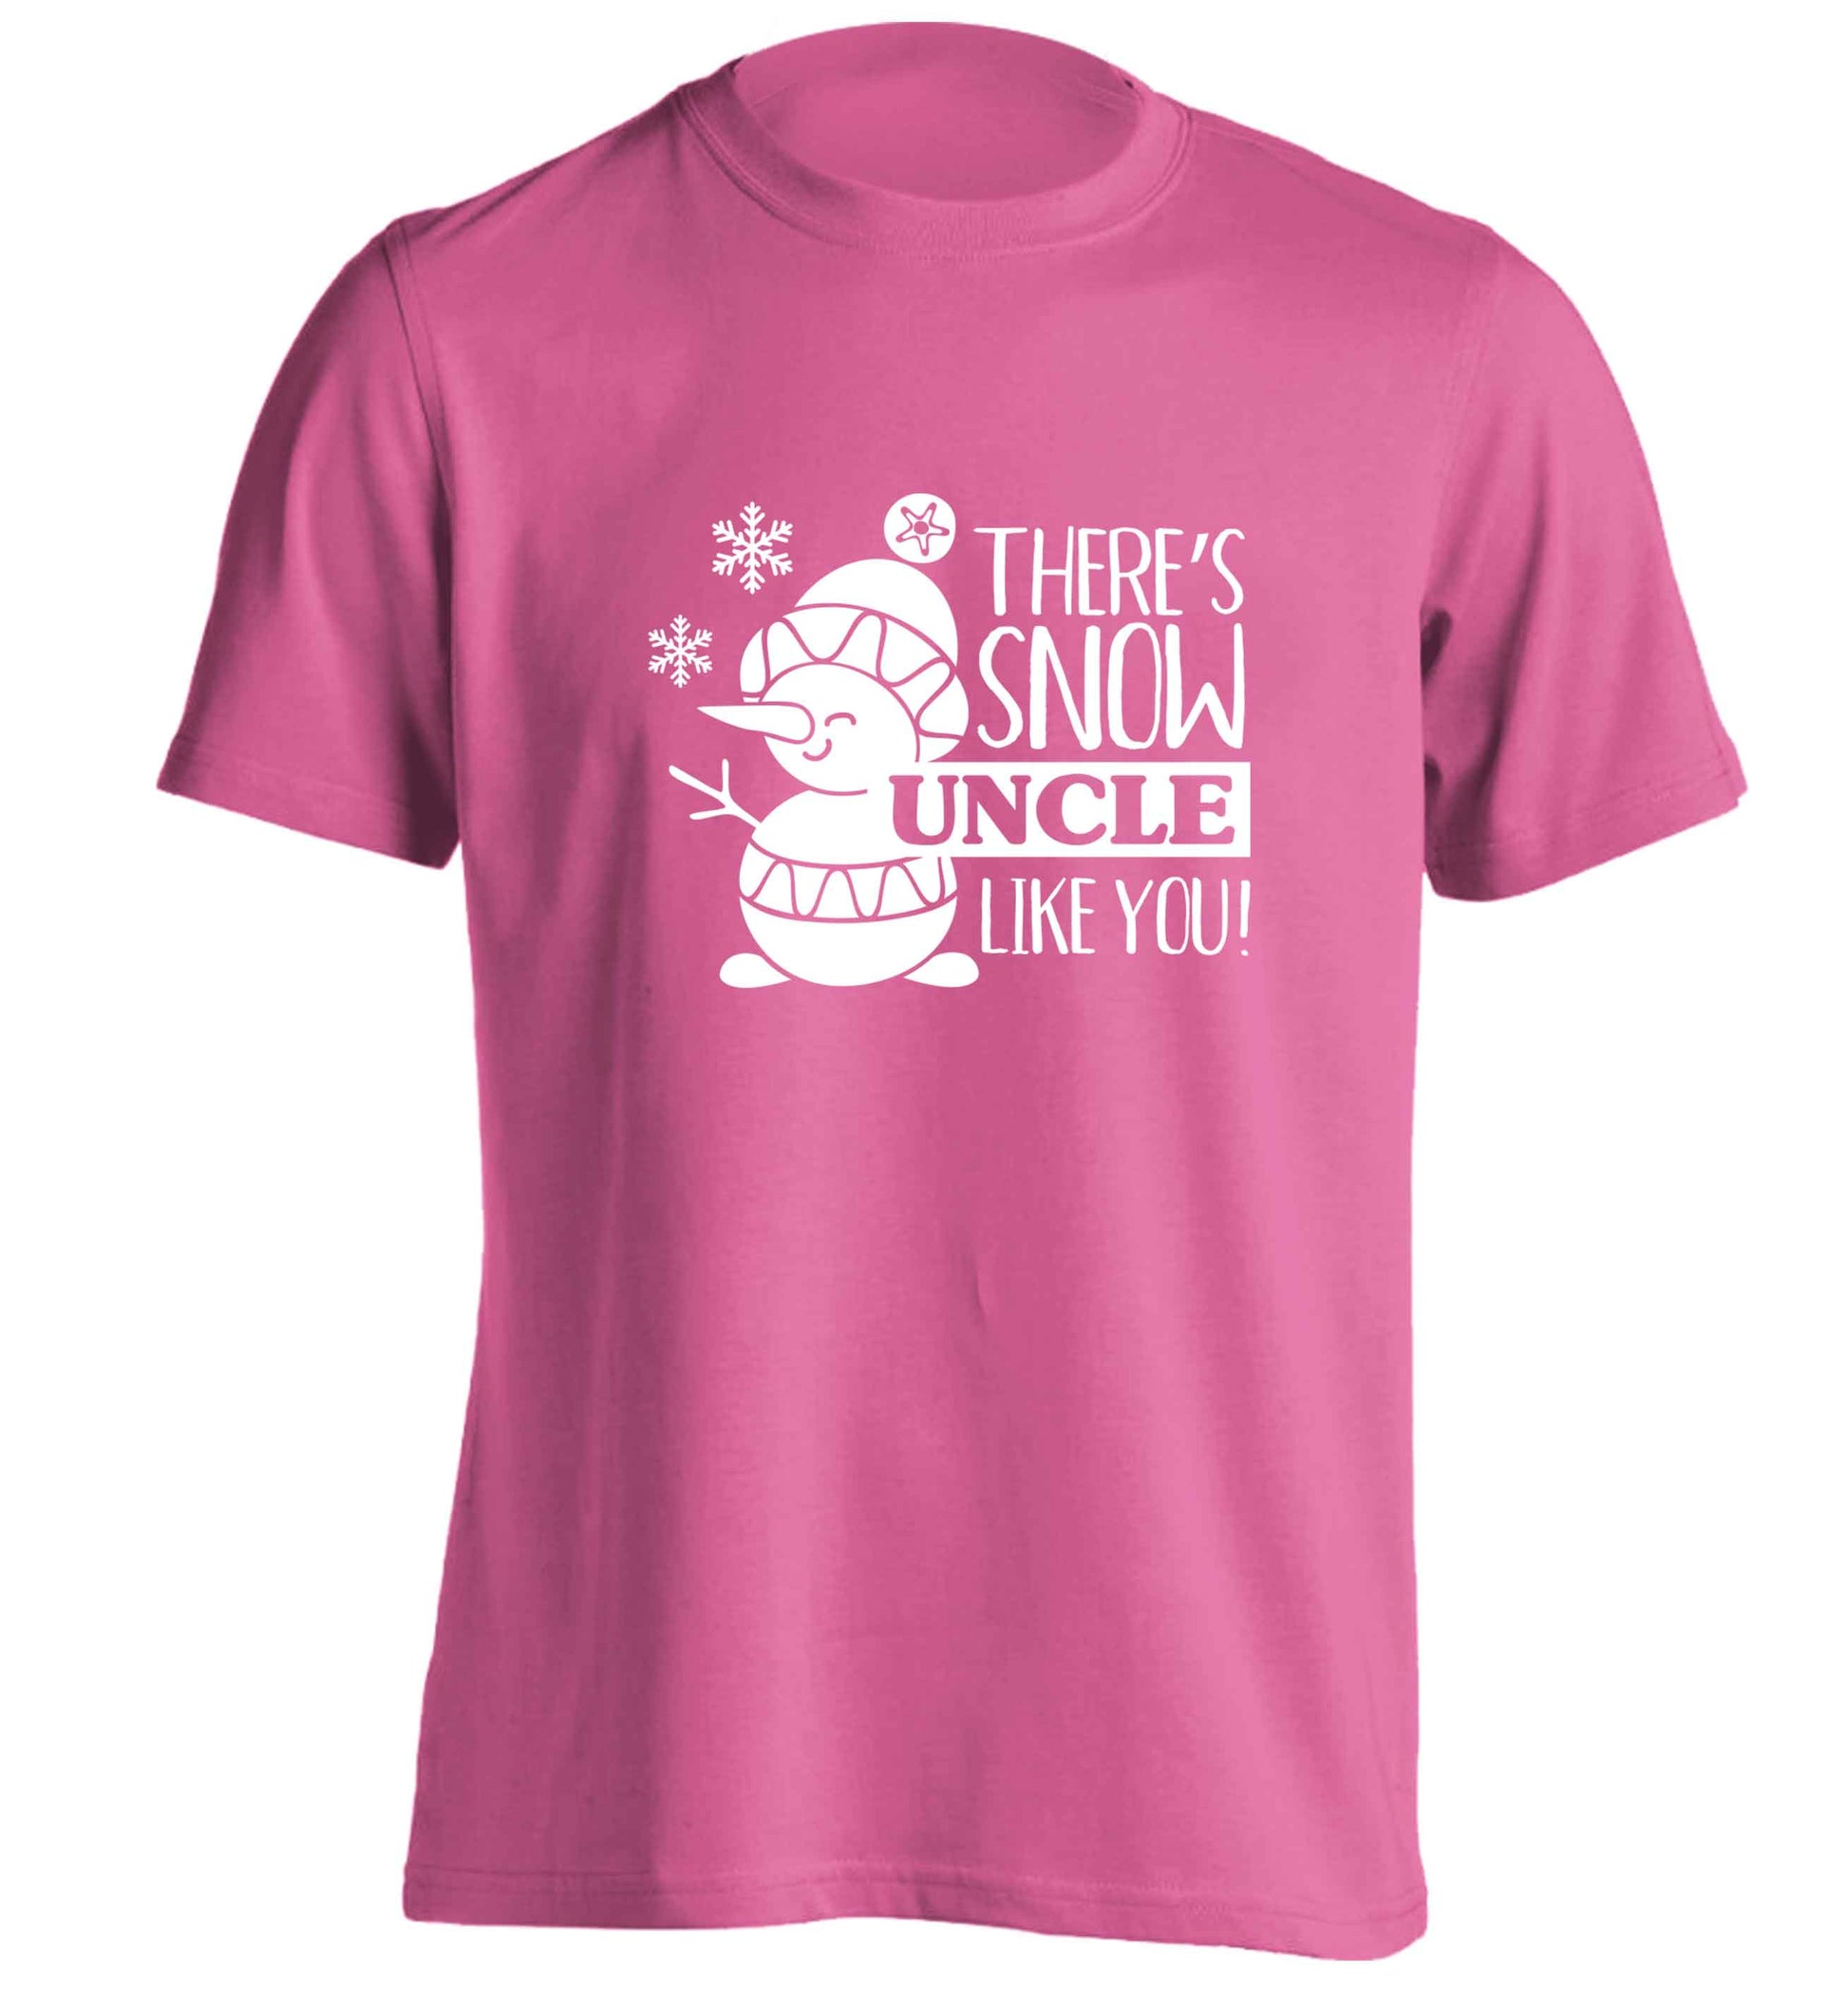 There's snow uncle like you adults unisex pink Tshirt 2XL